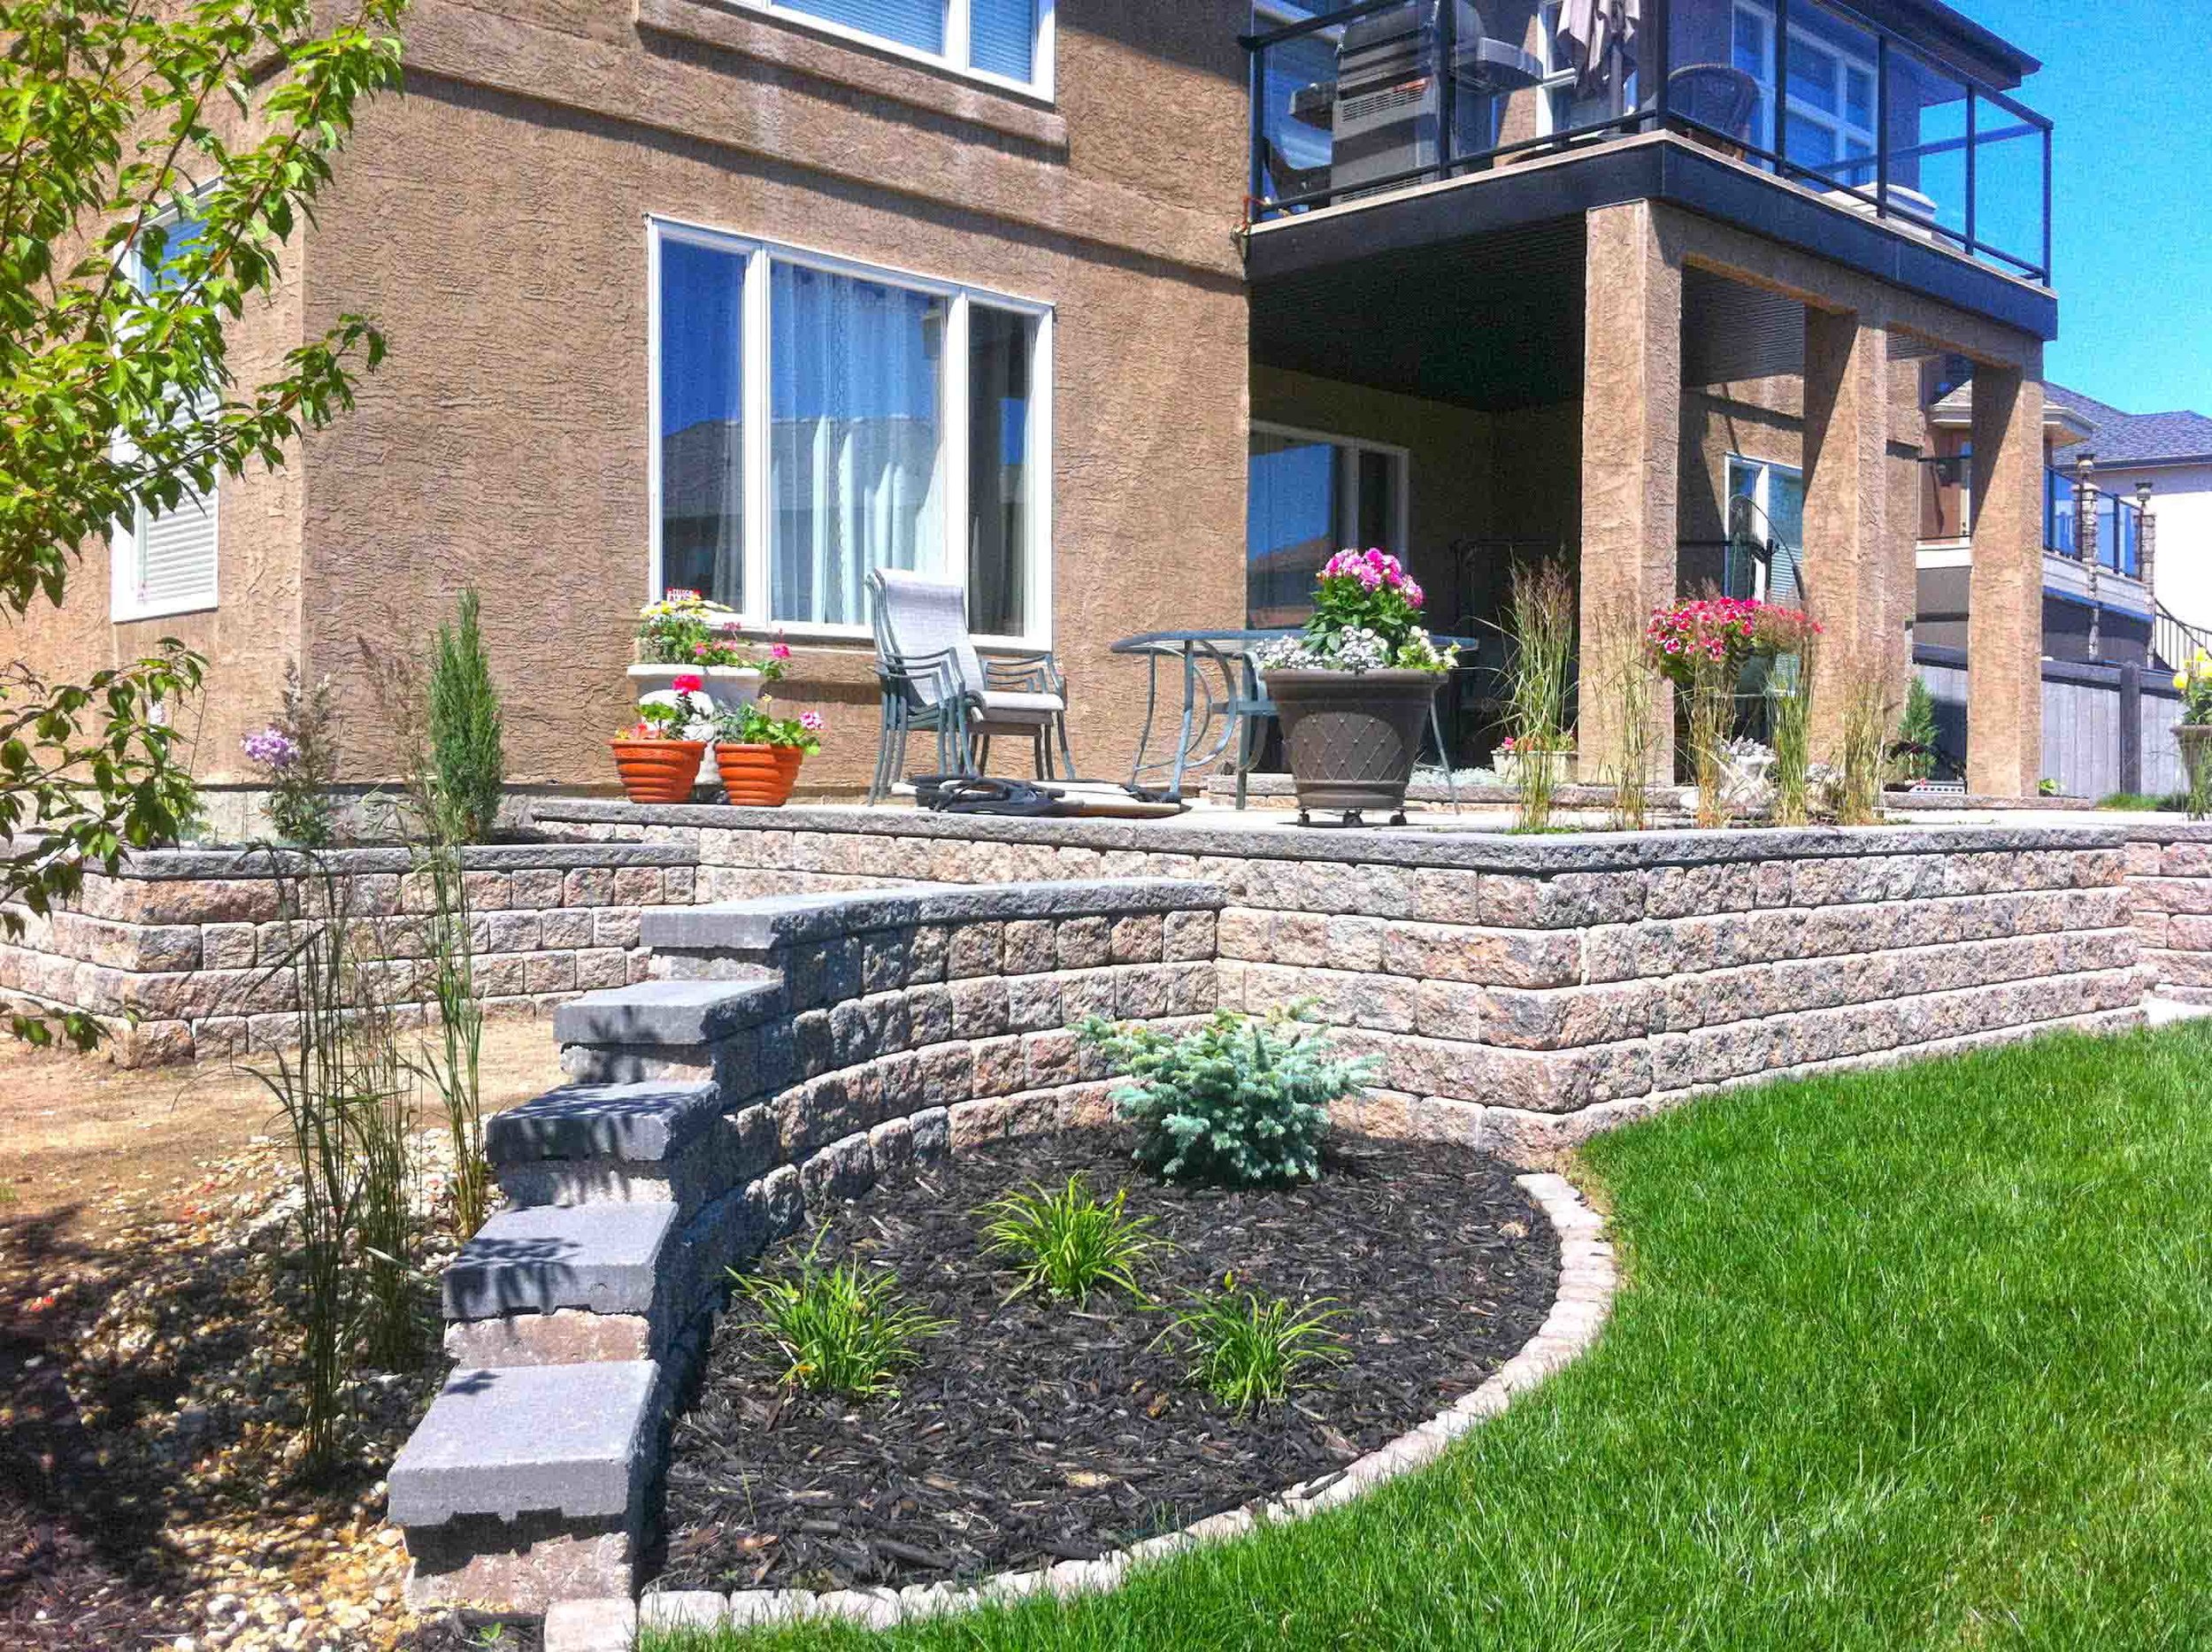 Retaining Wall With Plant Material (Copy)